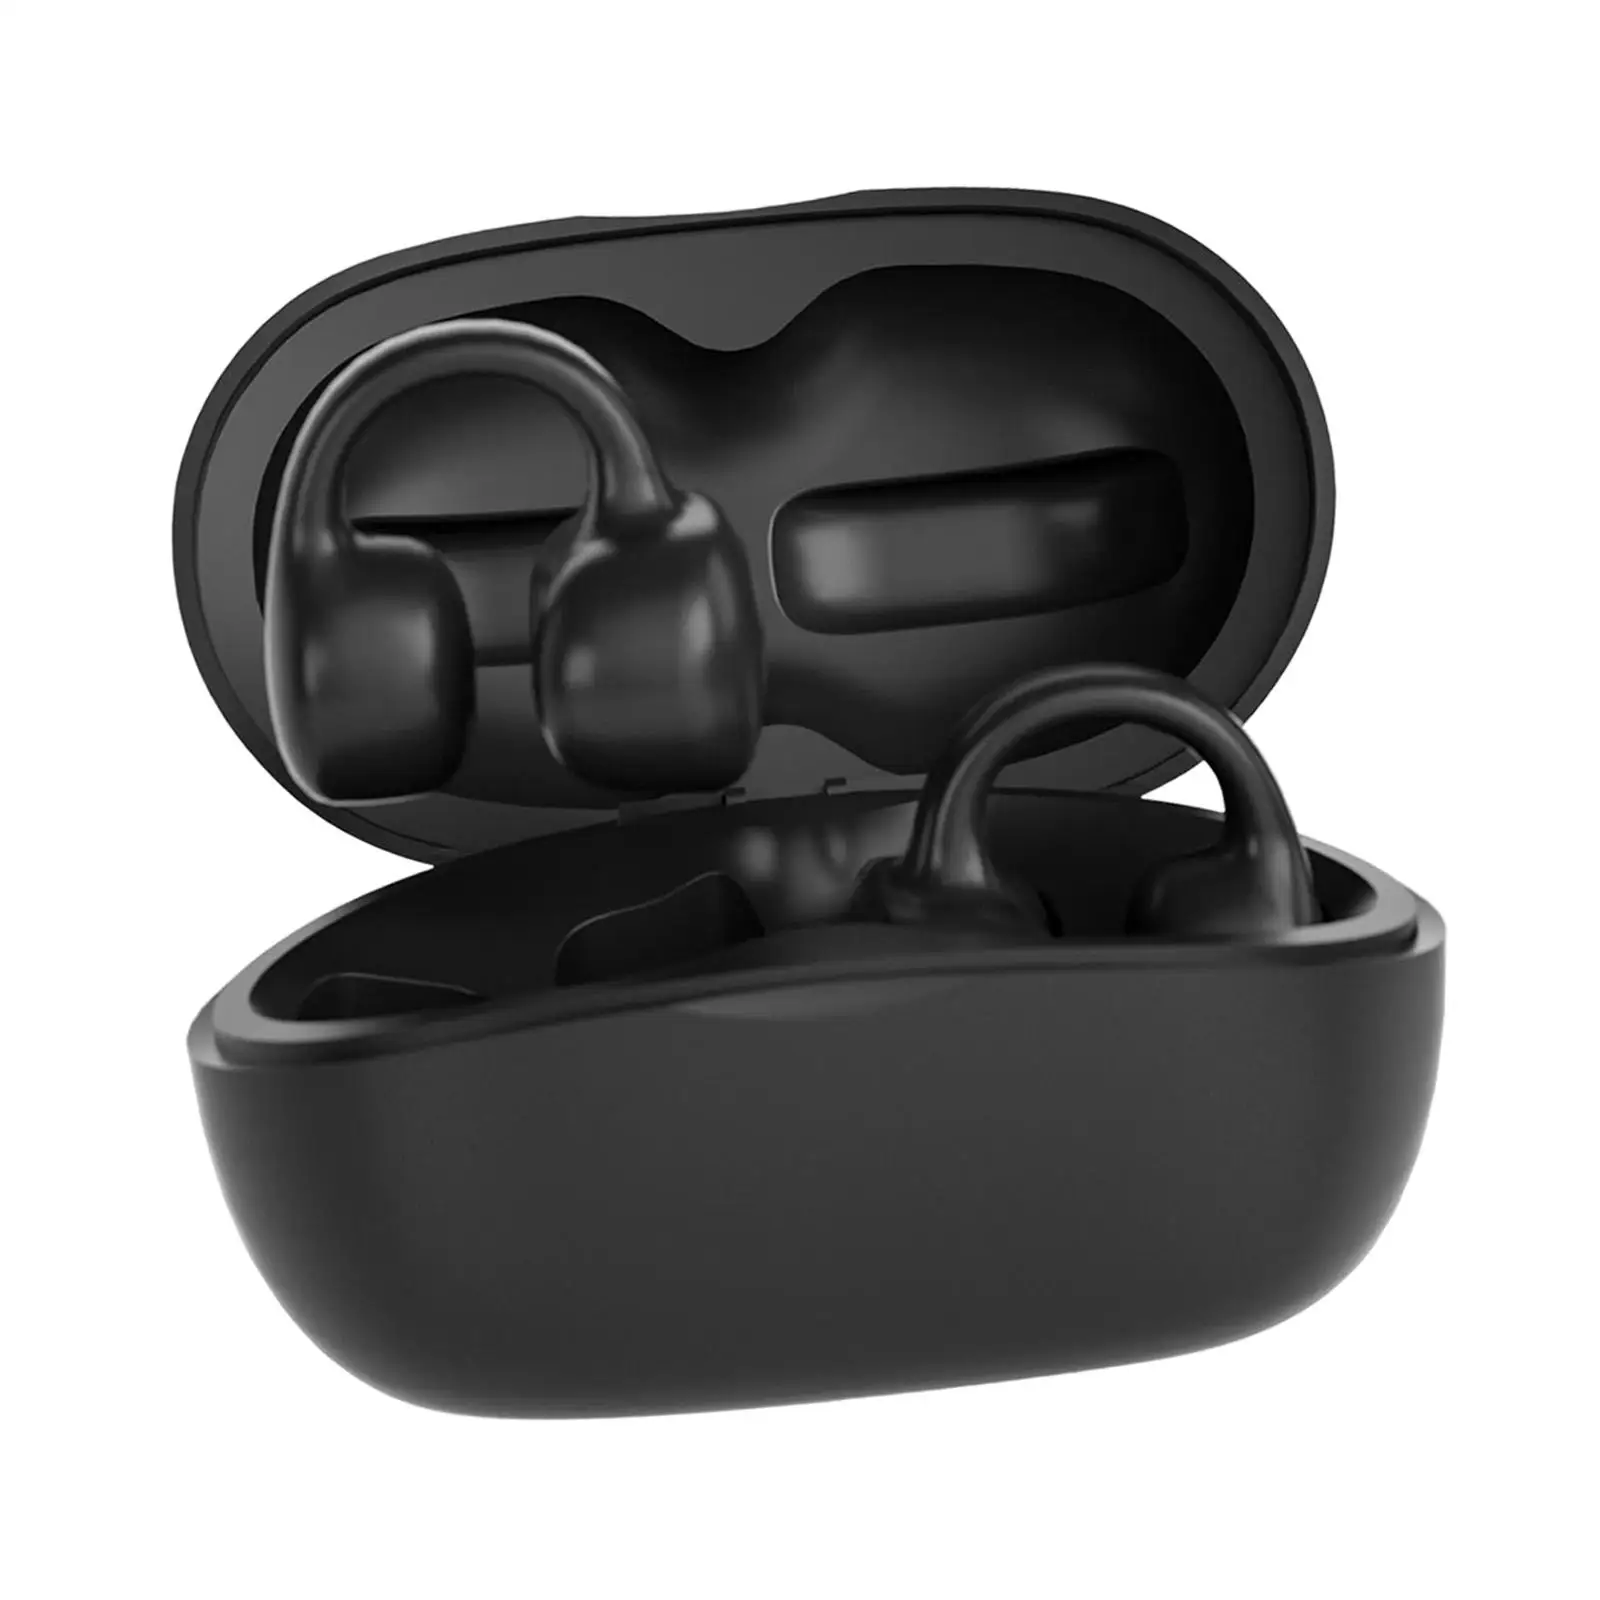 Wireless Earphones Low Latency Durable Stereo for Outdoor Driving Office